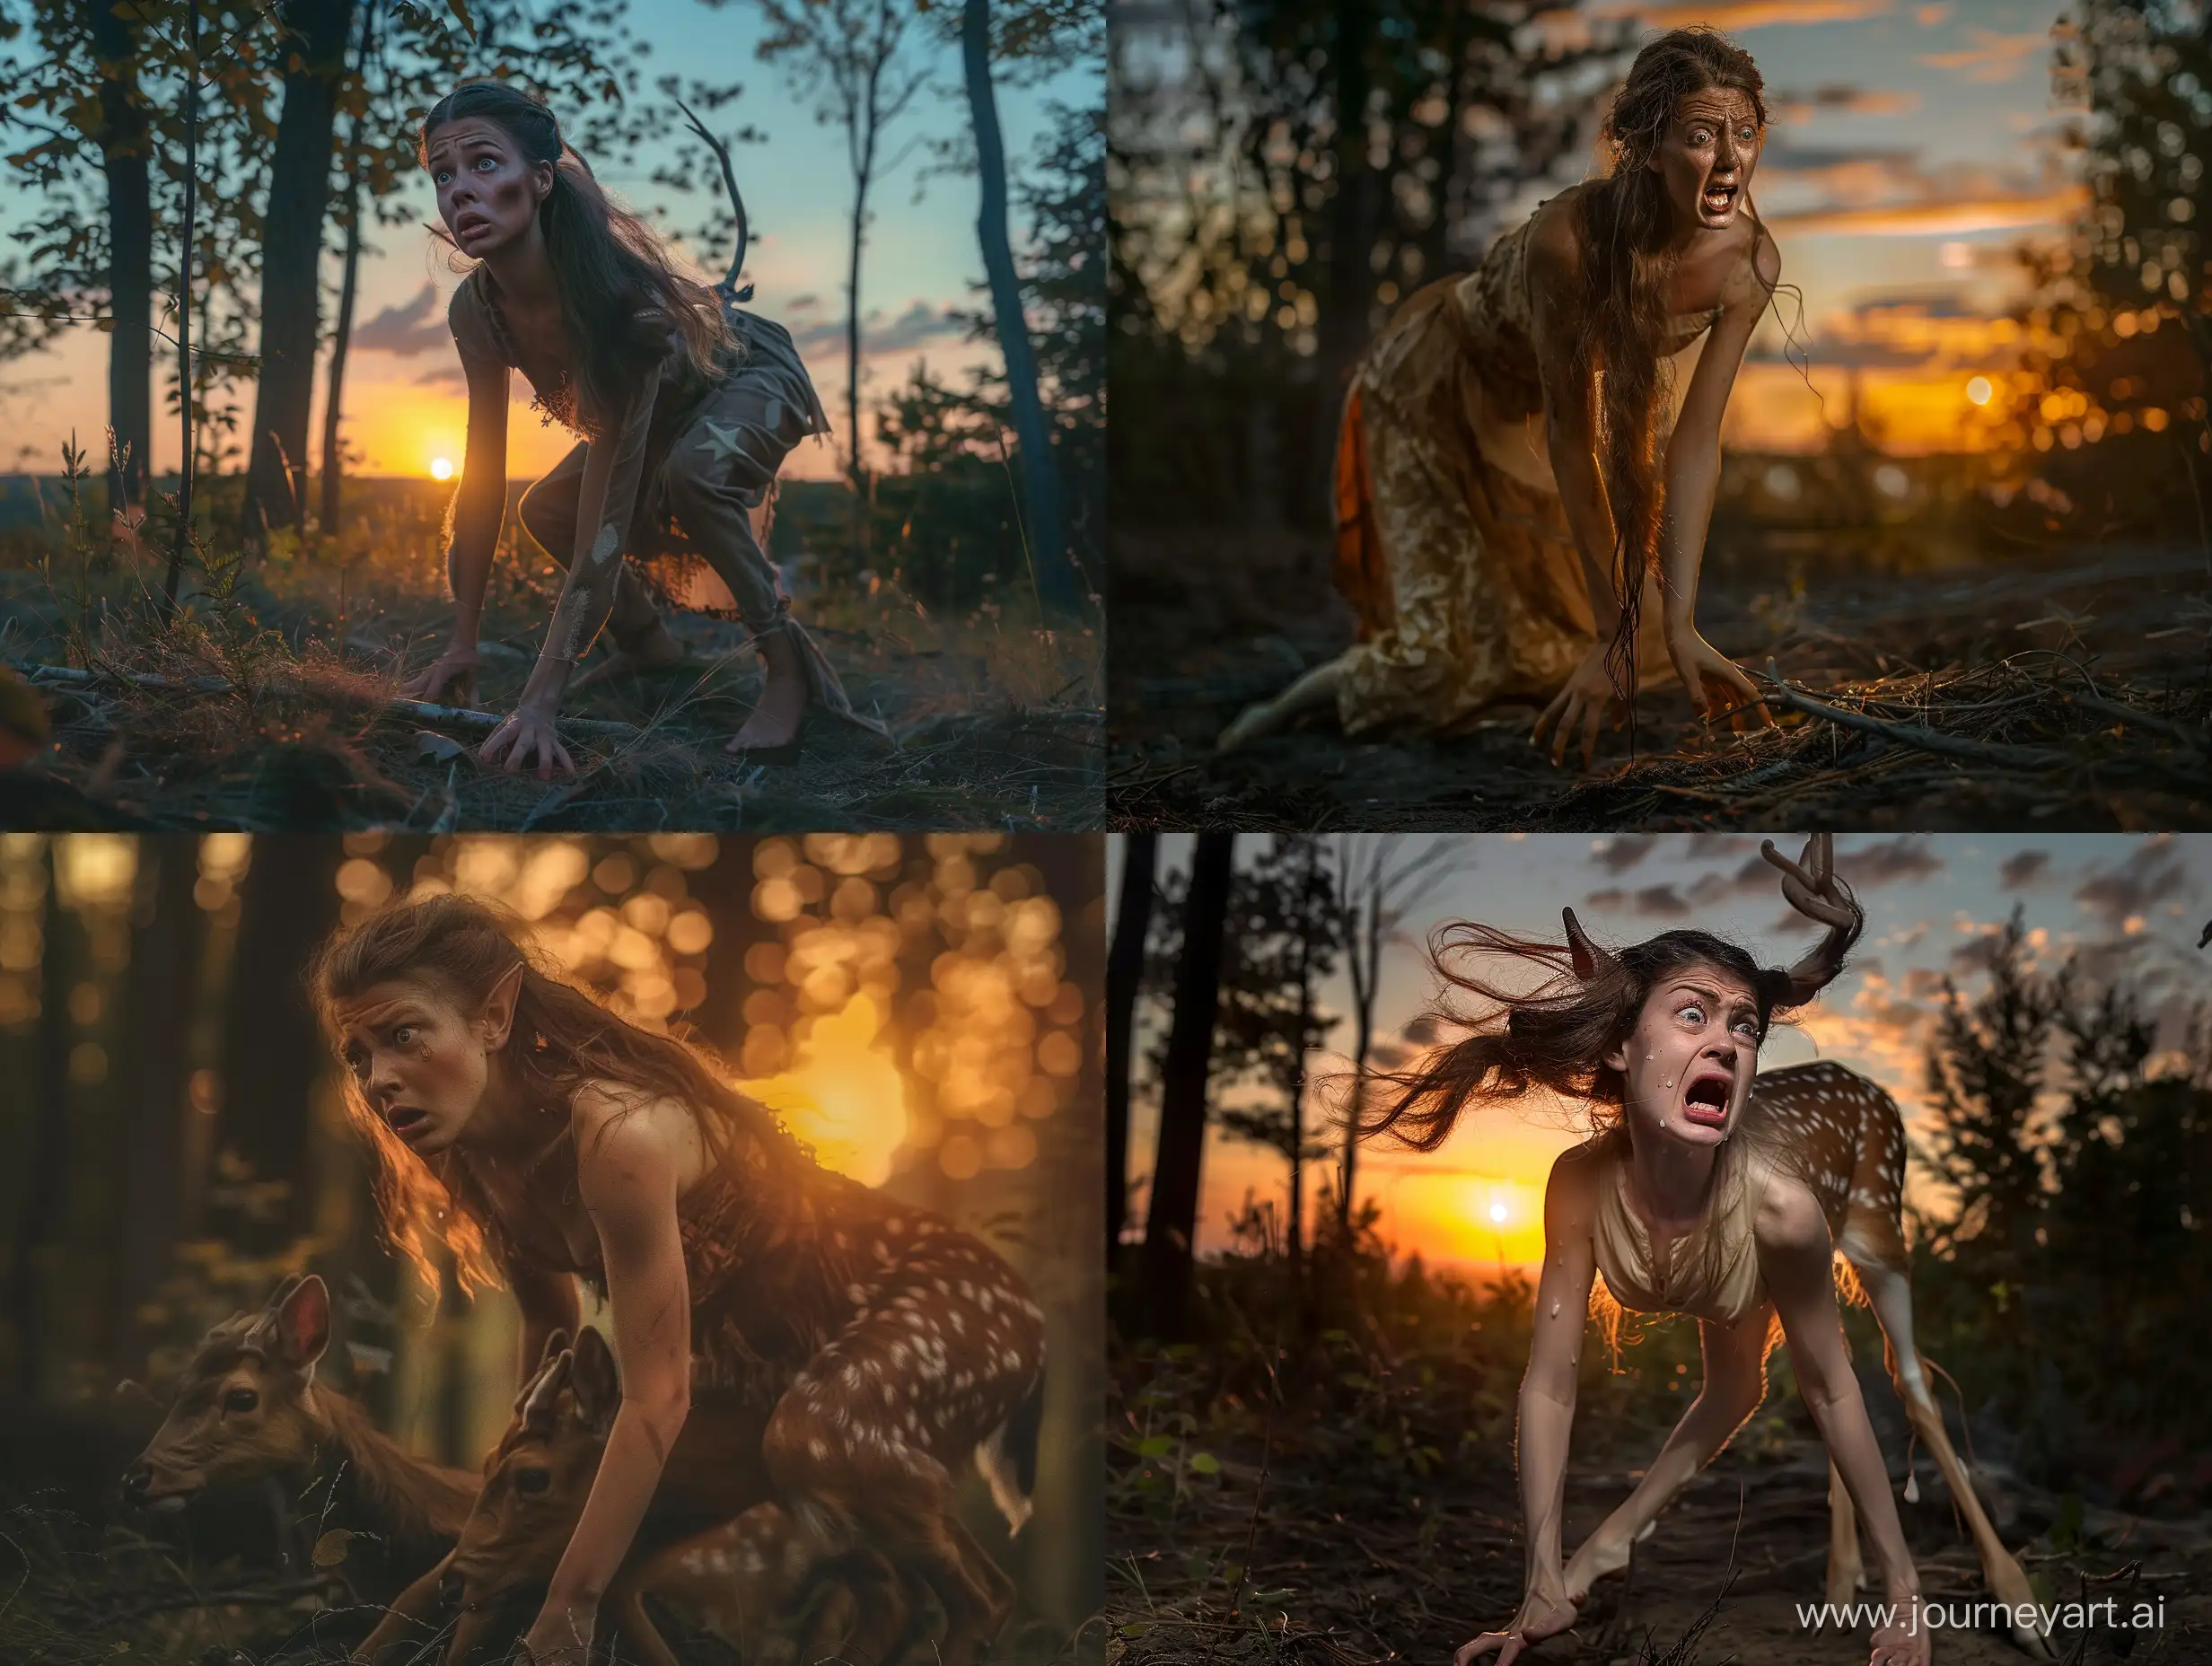 A photograph of a medieval princess  with loose brown hair, who has been transformed into a deer. The photo is taken while the transformation is almost completed. She is standing on all fours in a forest at sunset. She has a desperate expression, crying. Full body picture.